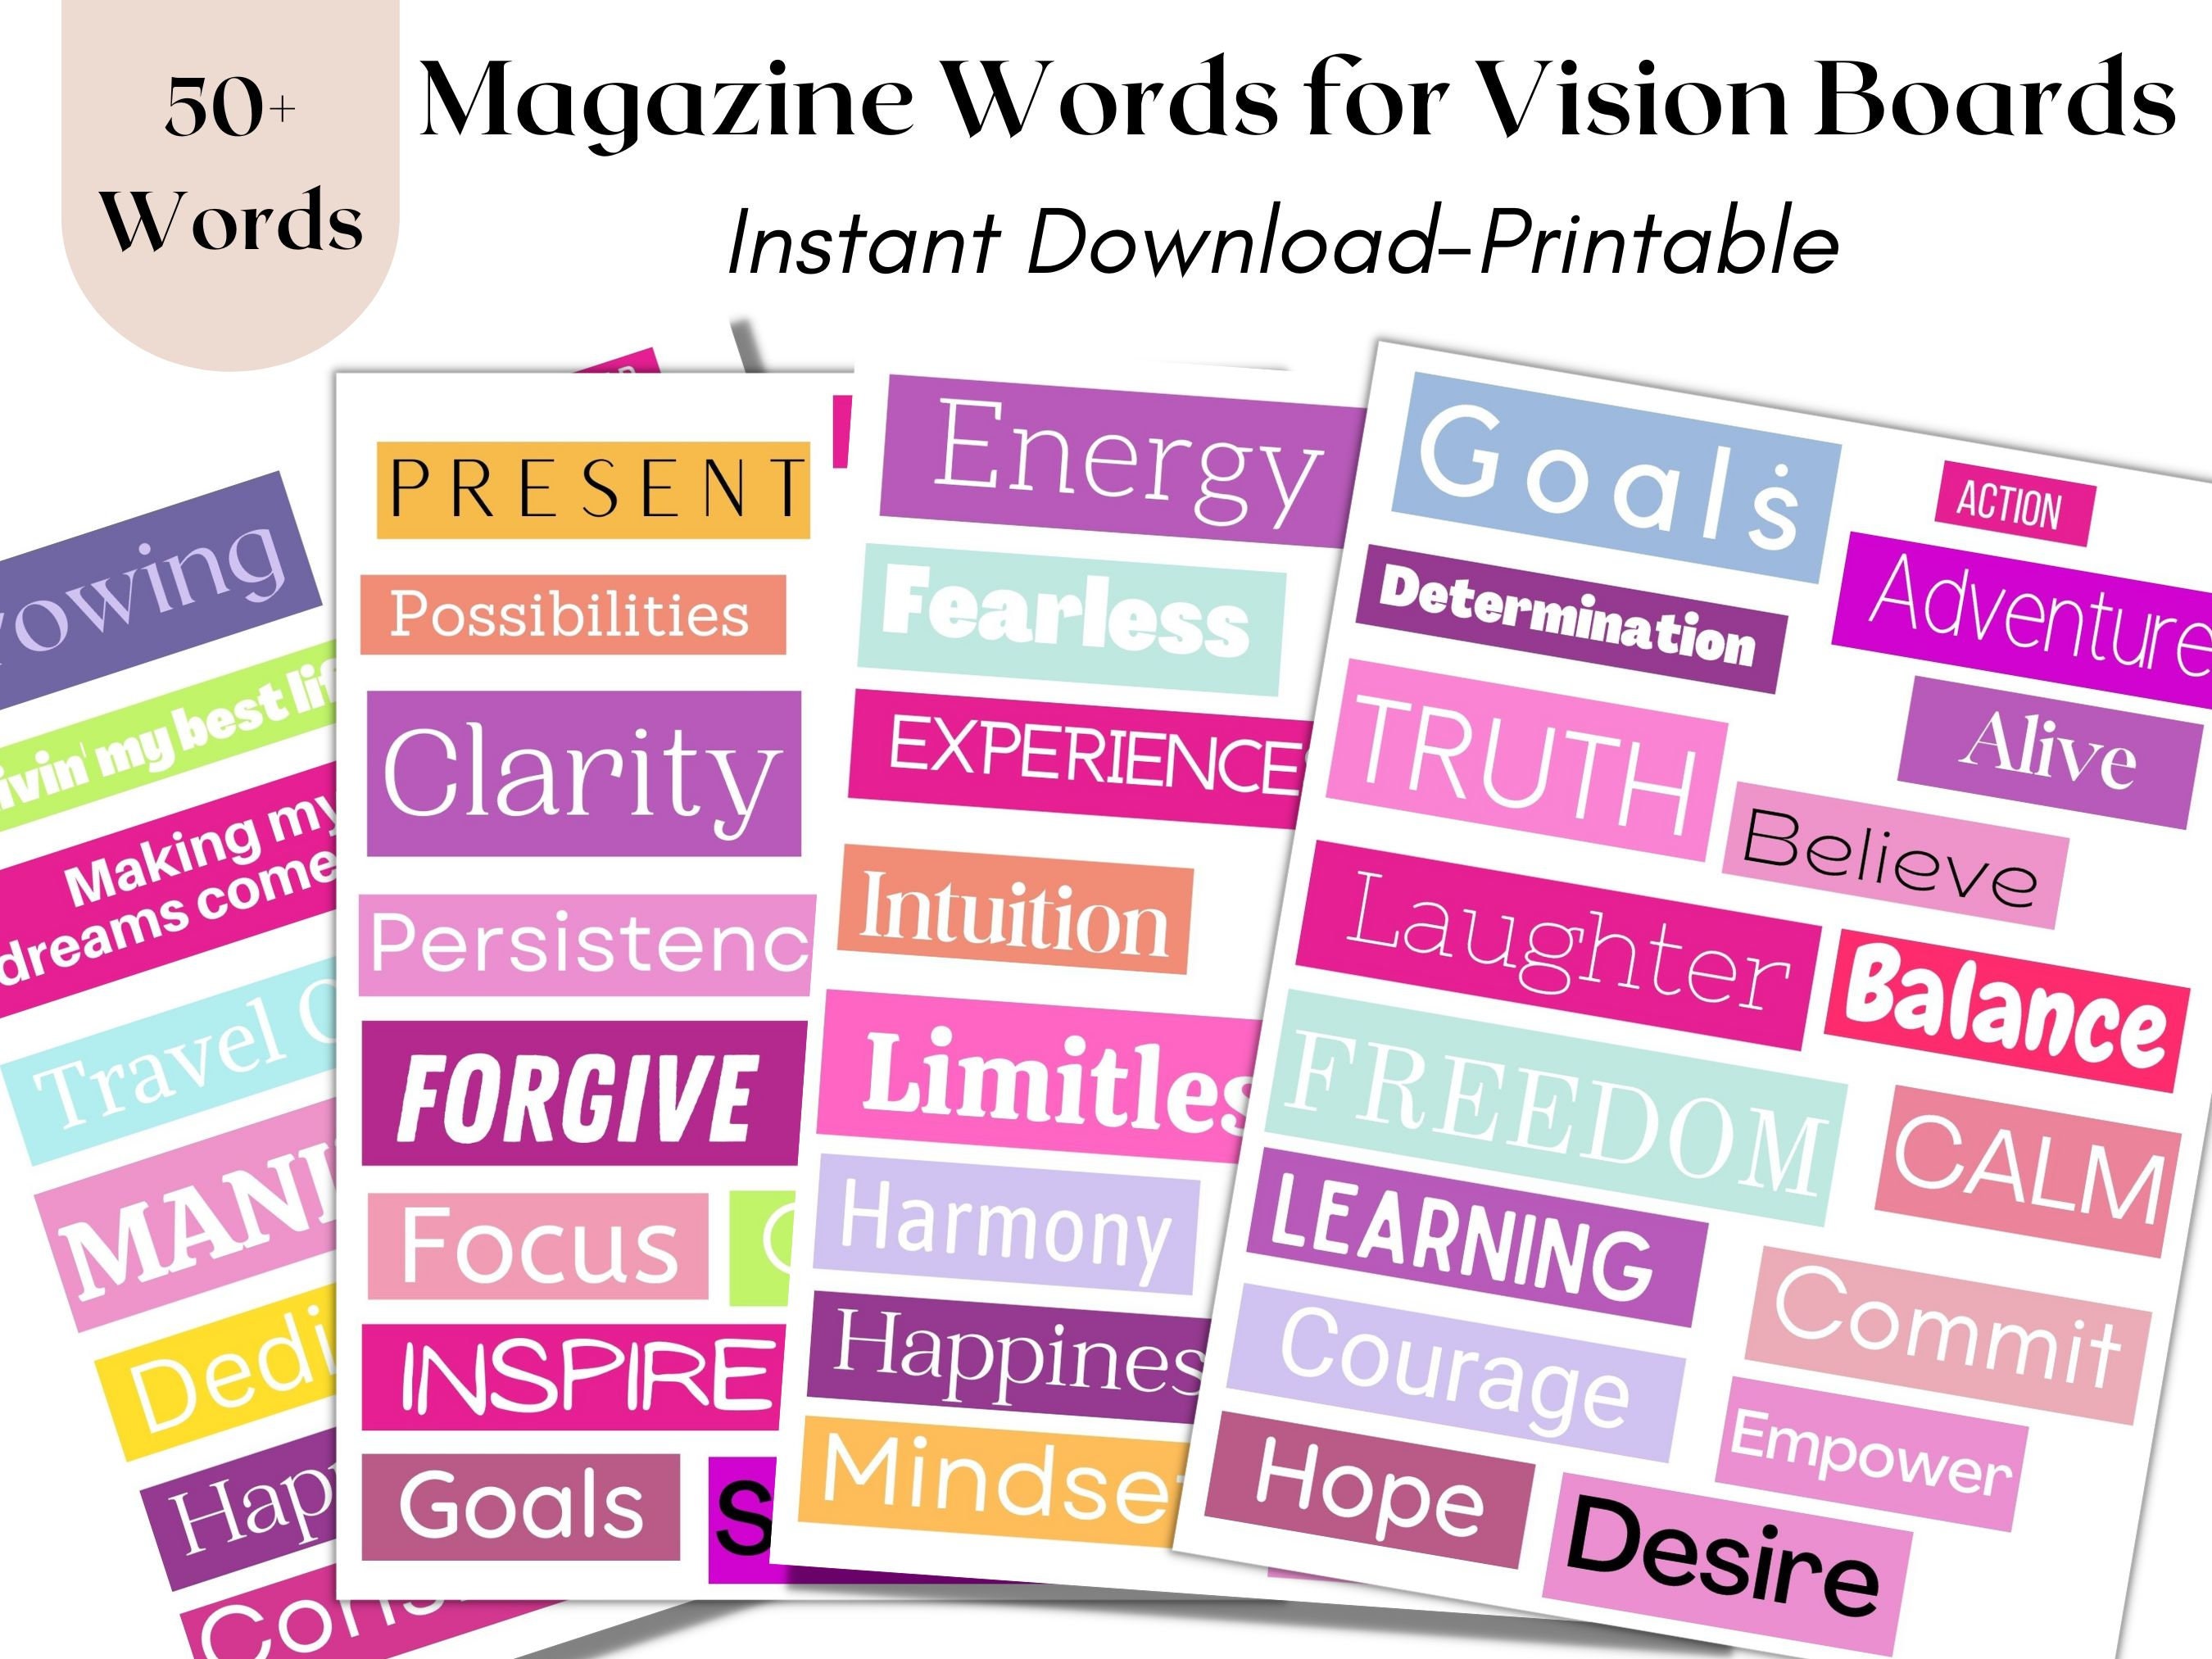 Vision Board Word Art Quotes: 160+ Motivational and Inspirational Word Art  Quotes Vision Board Kit For Adults Supplies ( magazines for vision board 